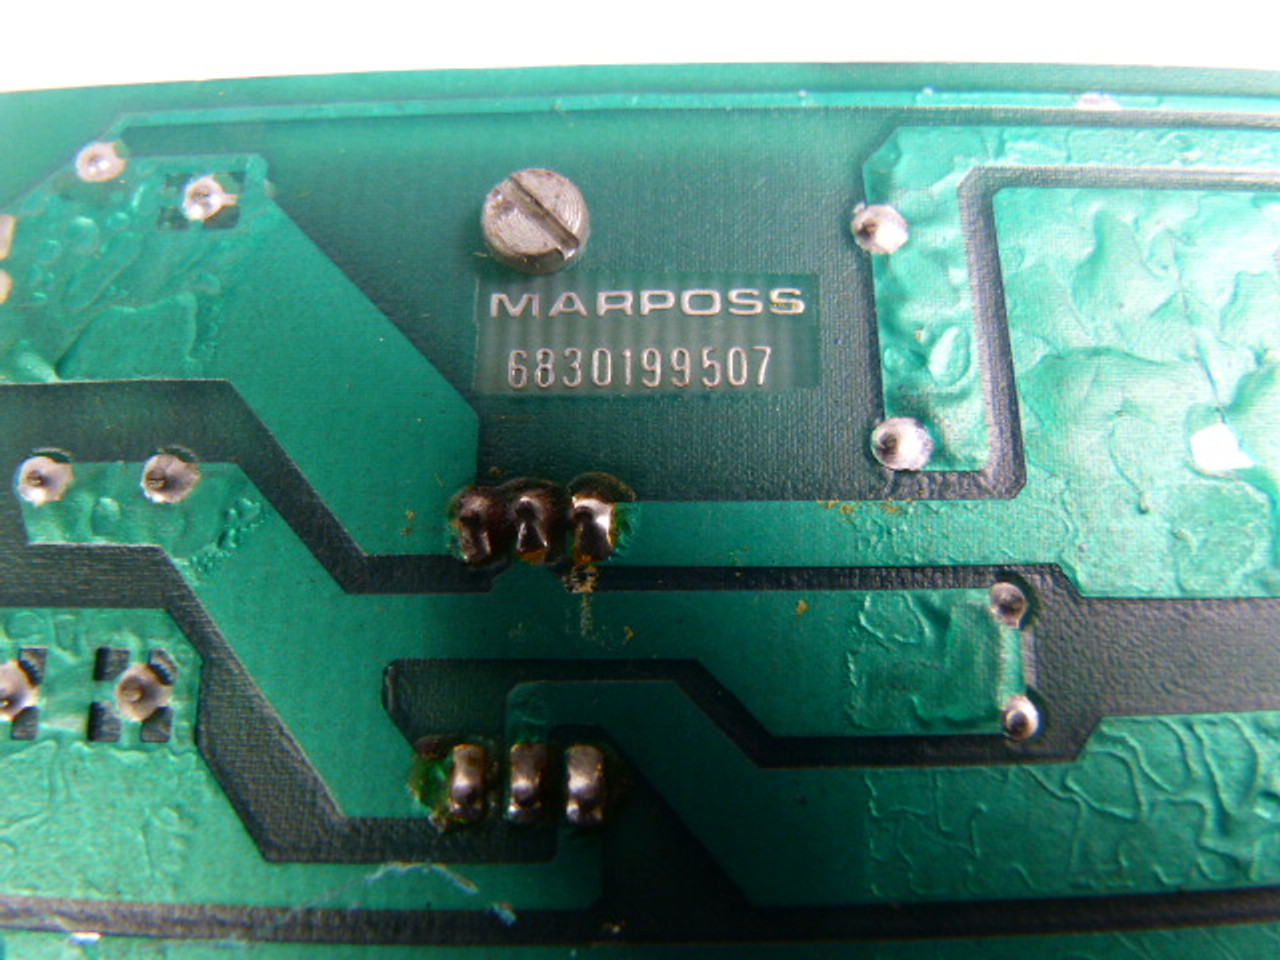 Marposs 6830199507 Control Card Assembly USED